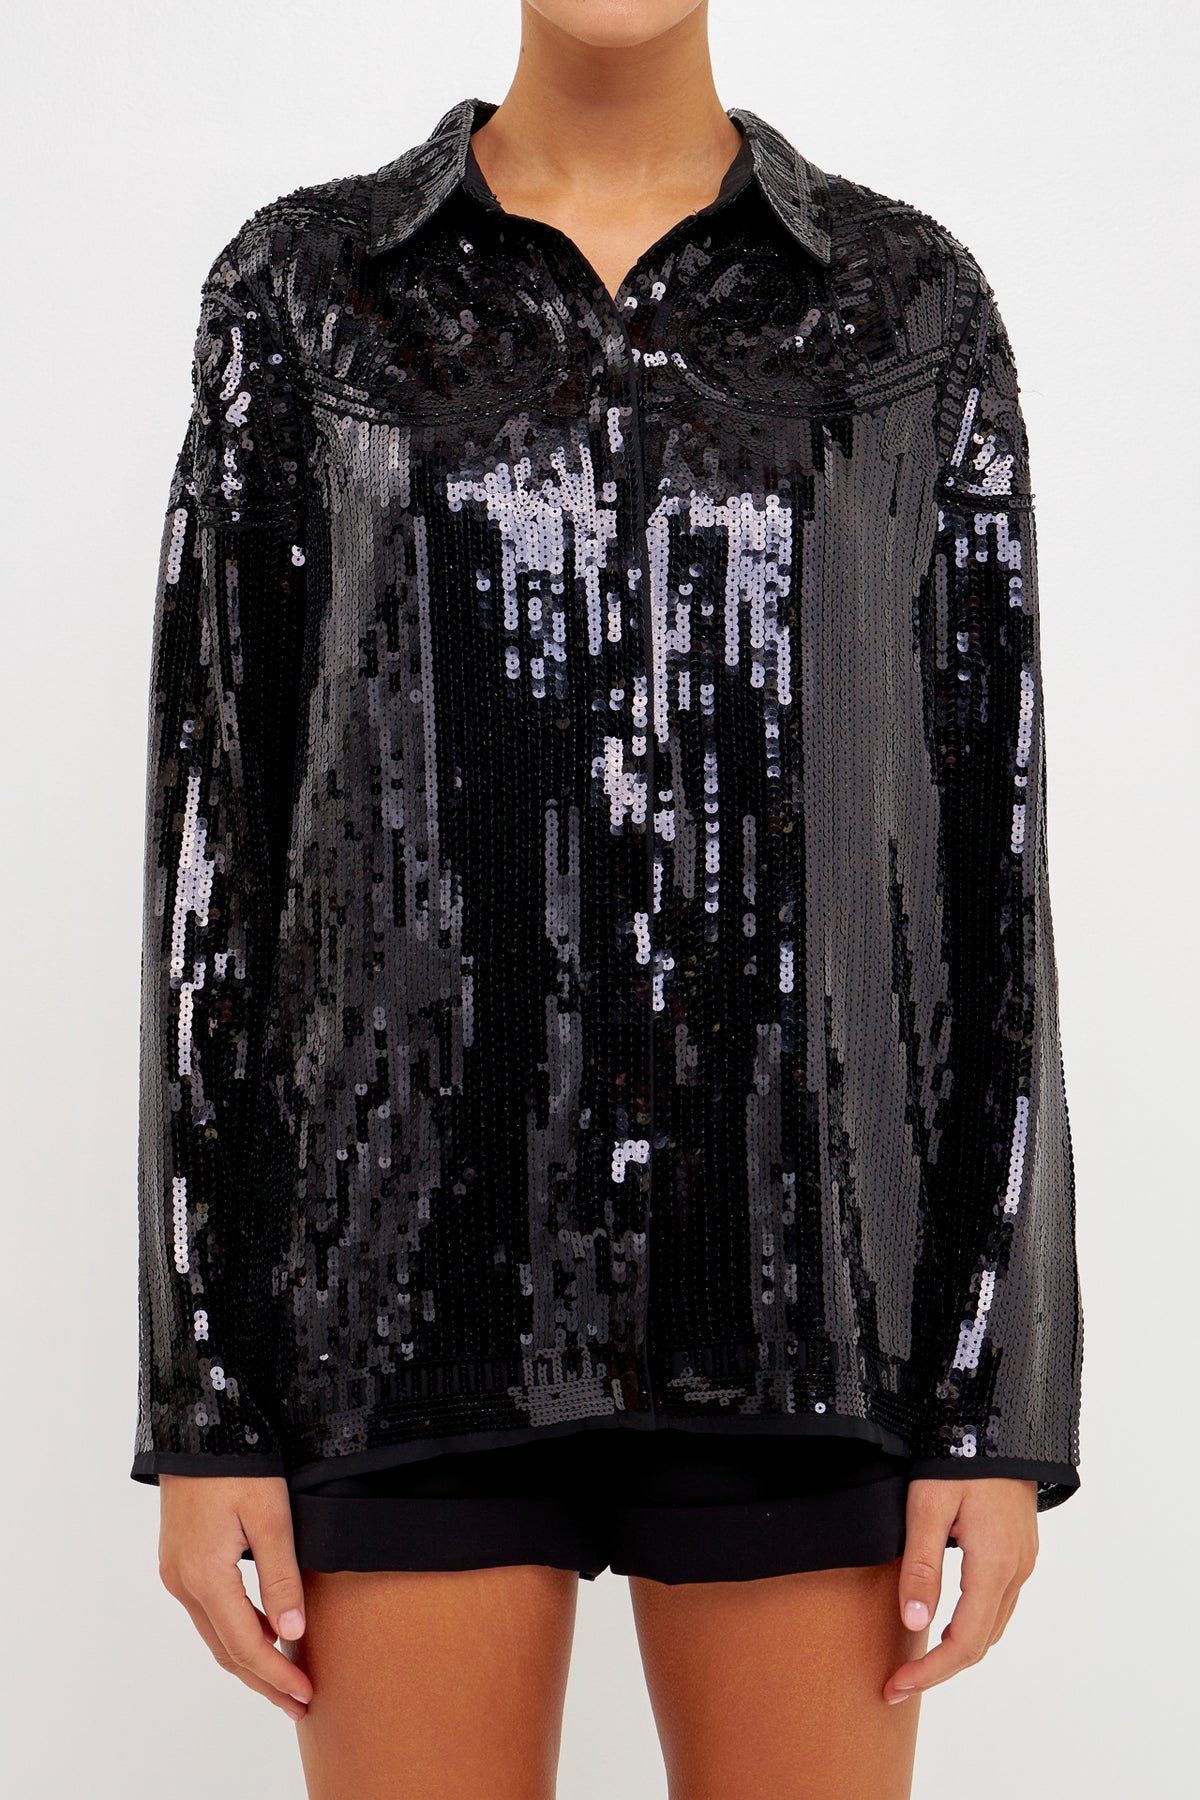 ENDLESS ROSE - Sequins Dress Shirt - TOPS available at Objectrare